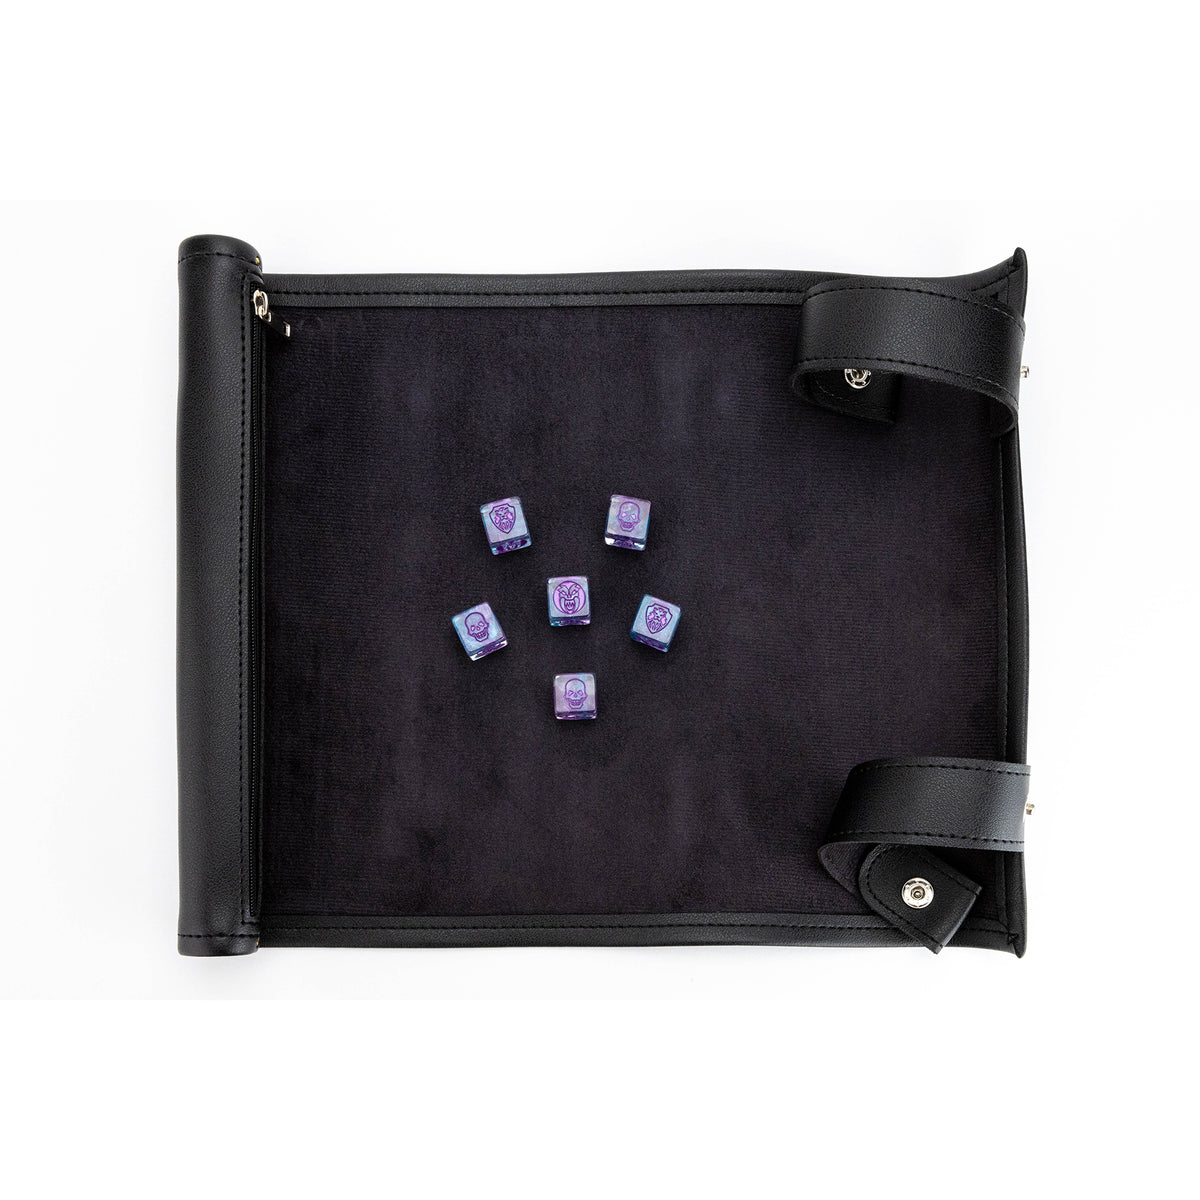 HeroQuest – The Dread Veil Dice Set with Scroll Dice Mat and